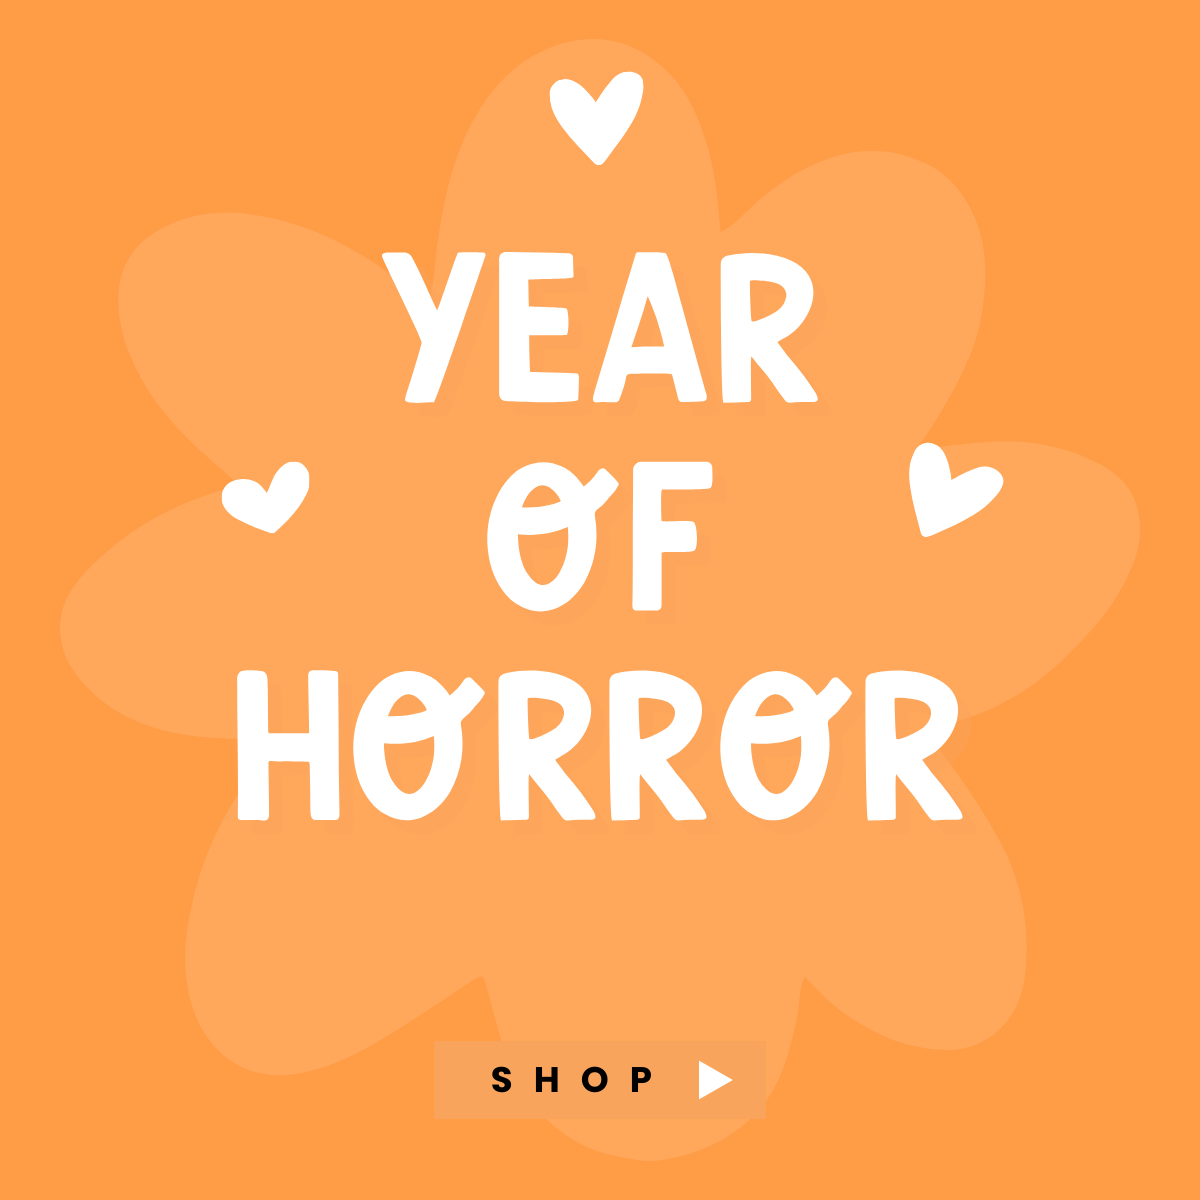 Year of Horror